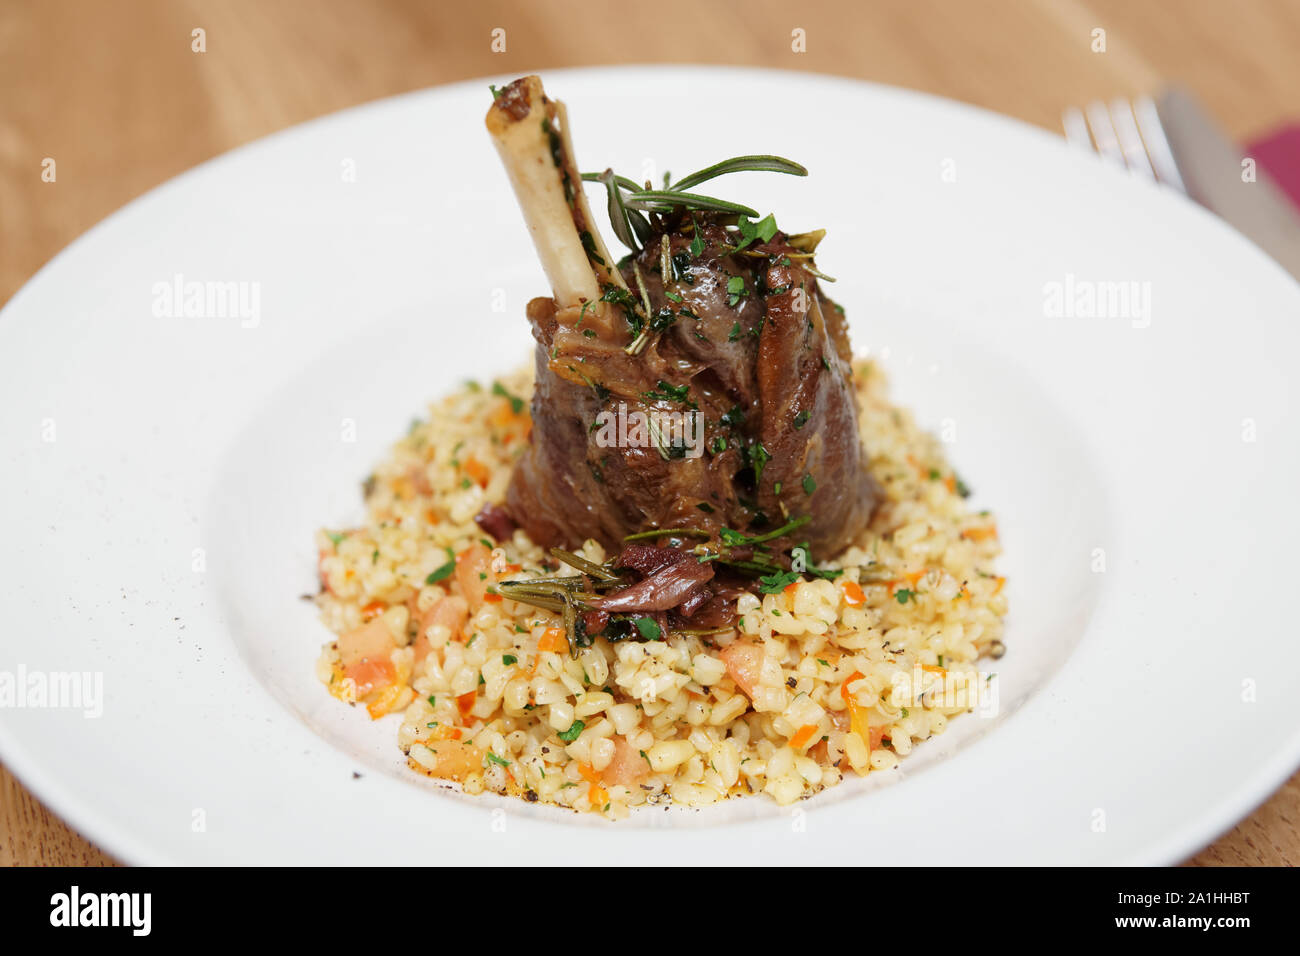 Braised lamb shank with herbs and bulgur cereal Stock Photo